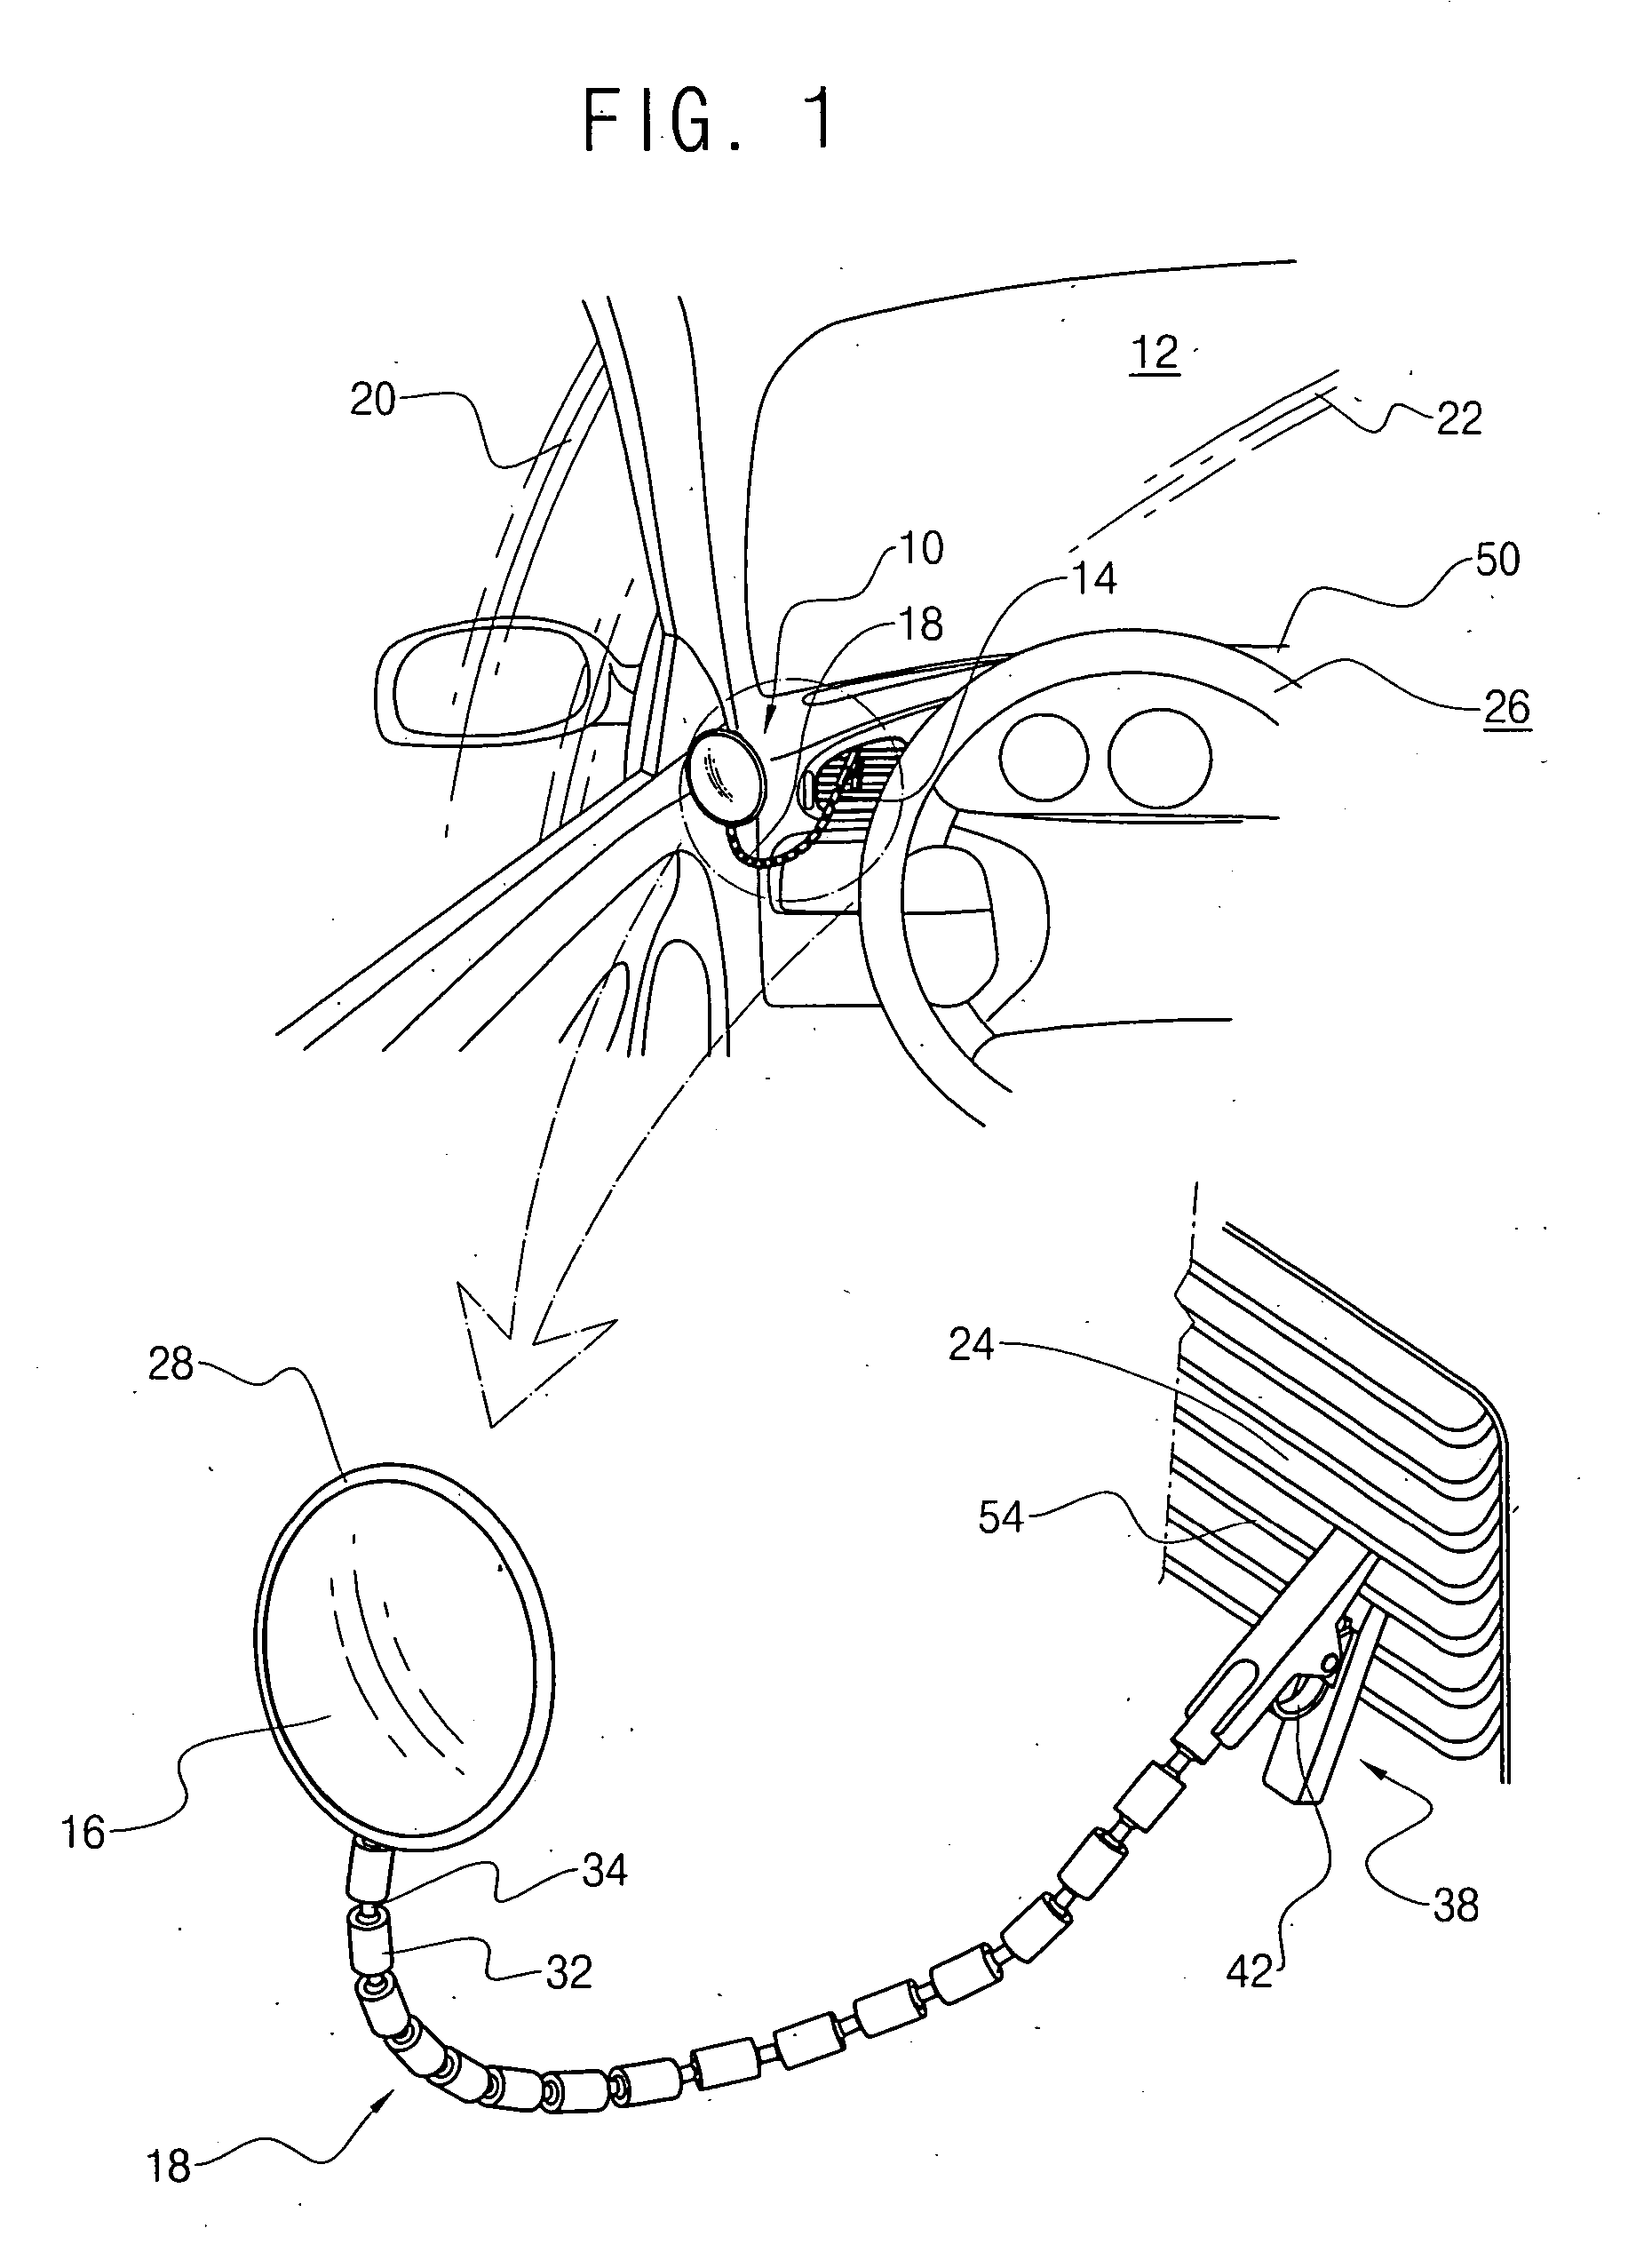 Flexible mirror device for a vehicle